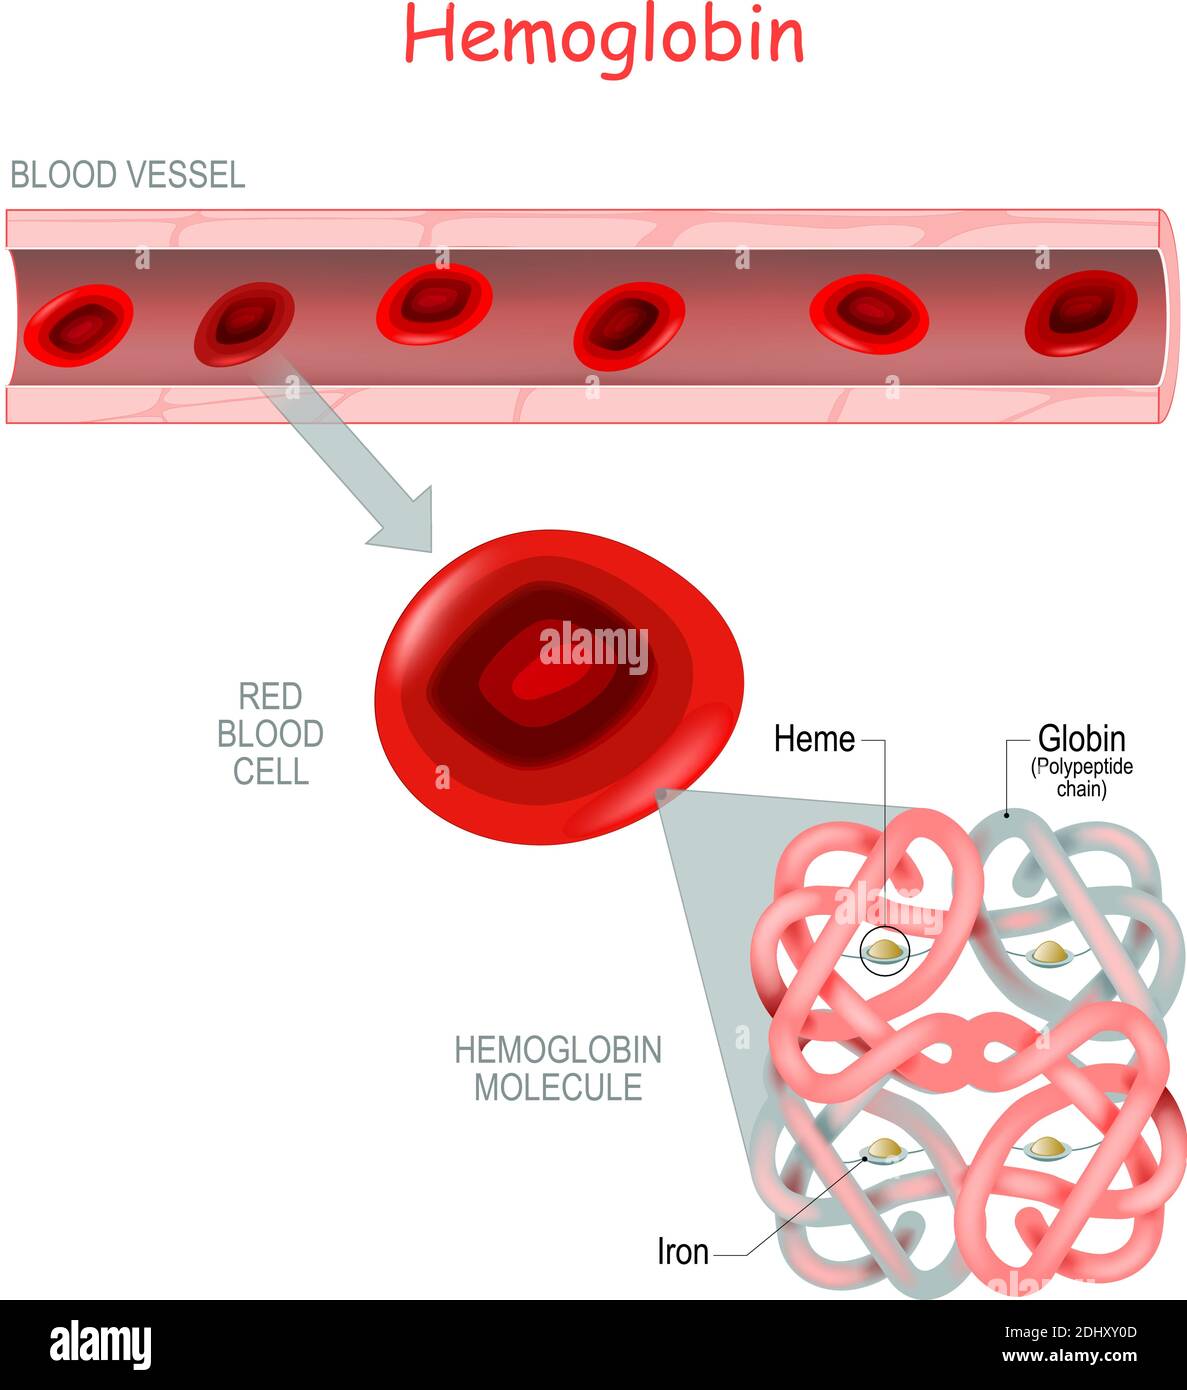 structure of the hemoglobin molecule with heme (Iron and oxygen molecule) and Polypeptide chain (Globin). Blood vessel and close-up of red blood cell. Stock Vector